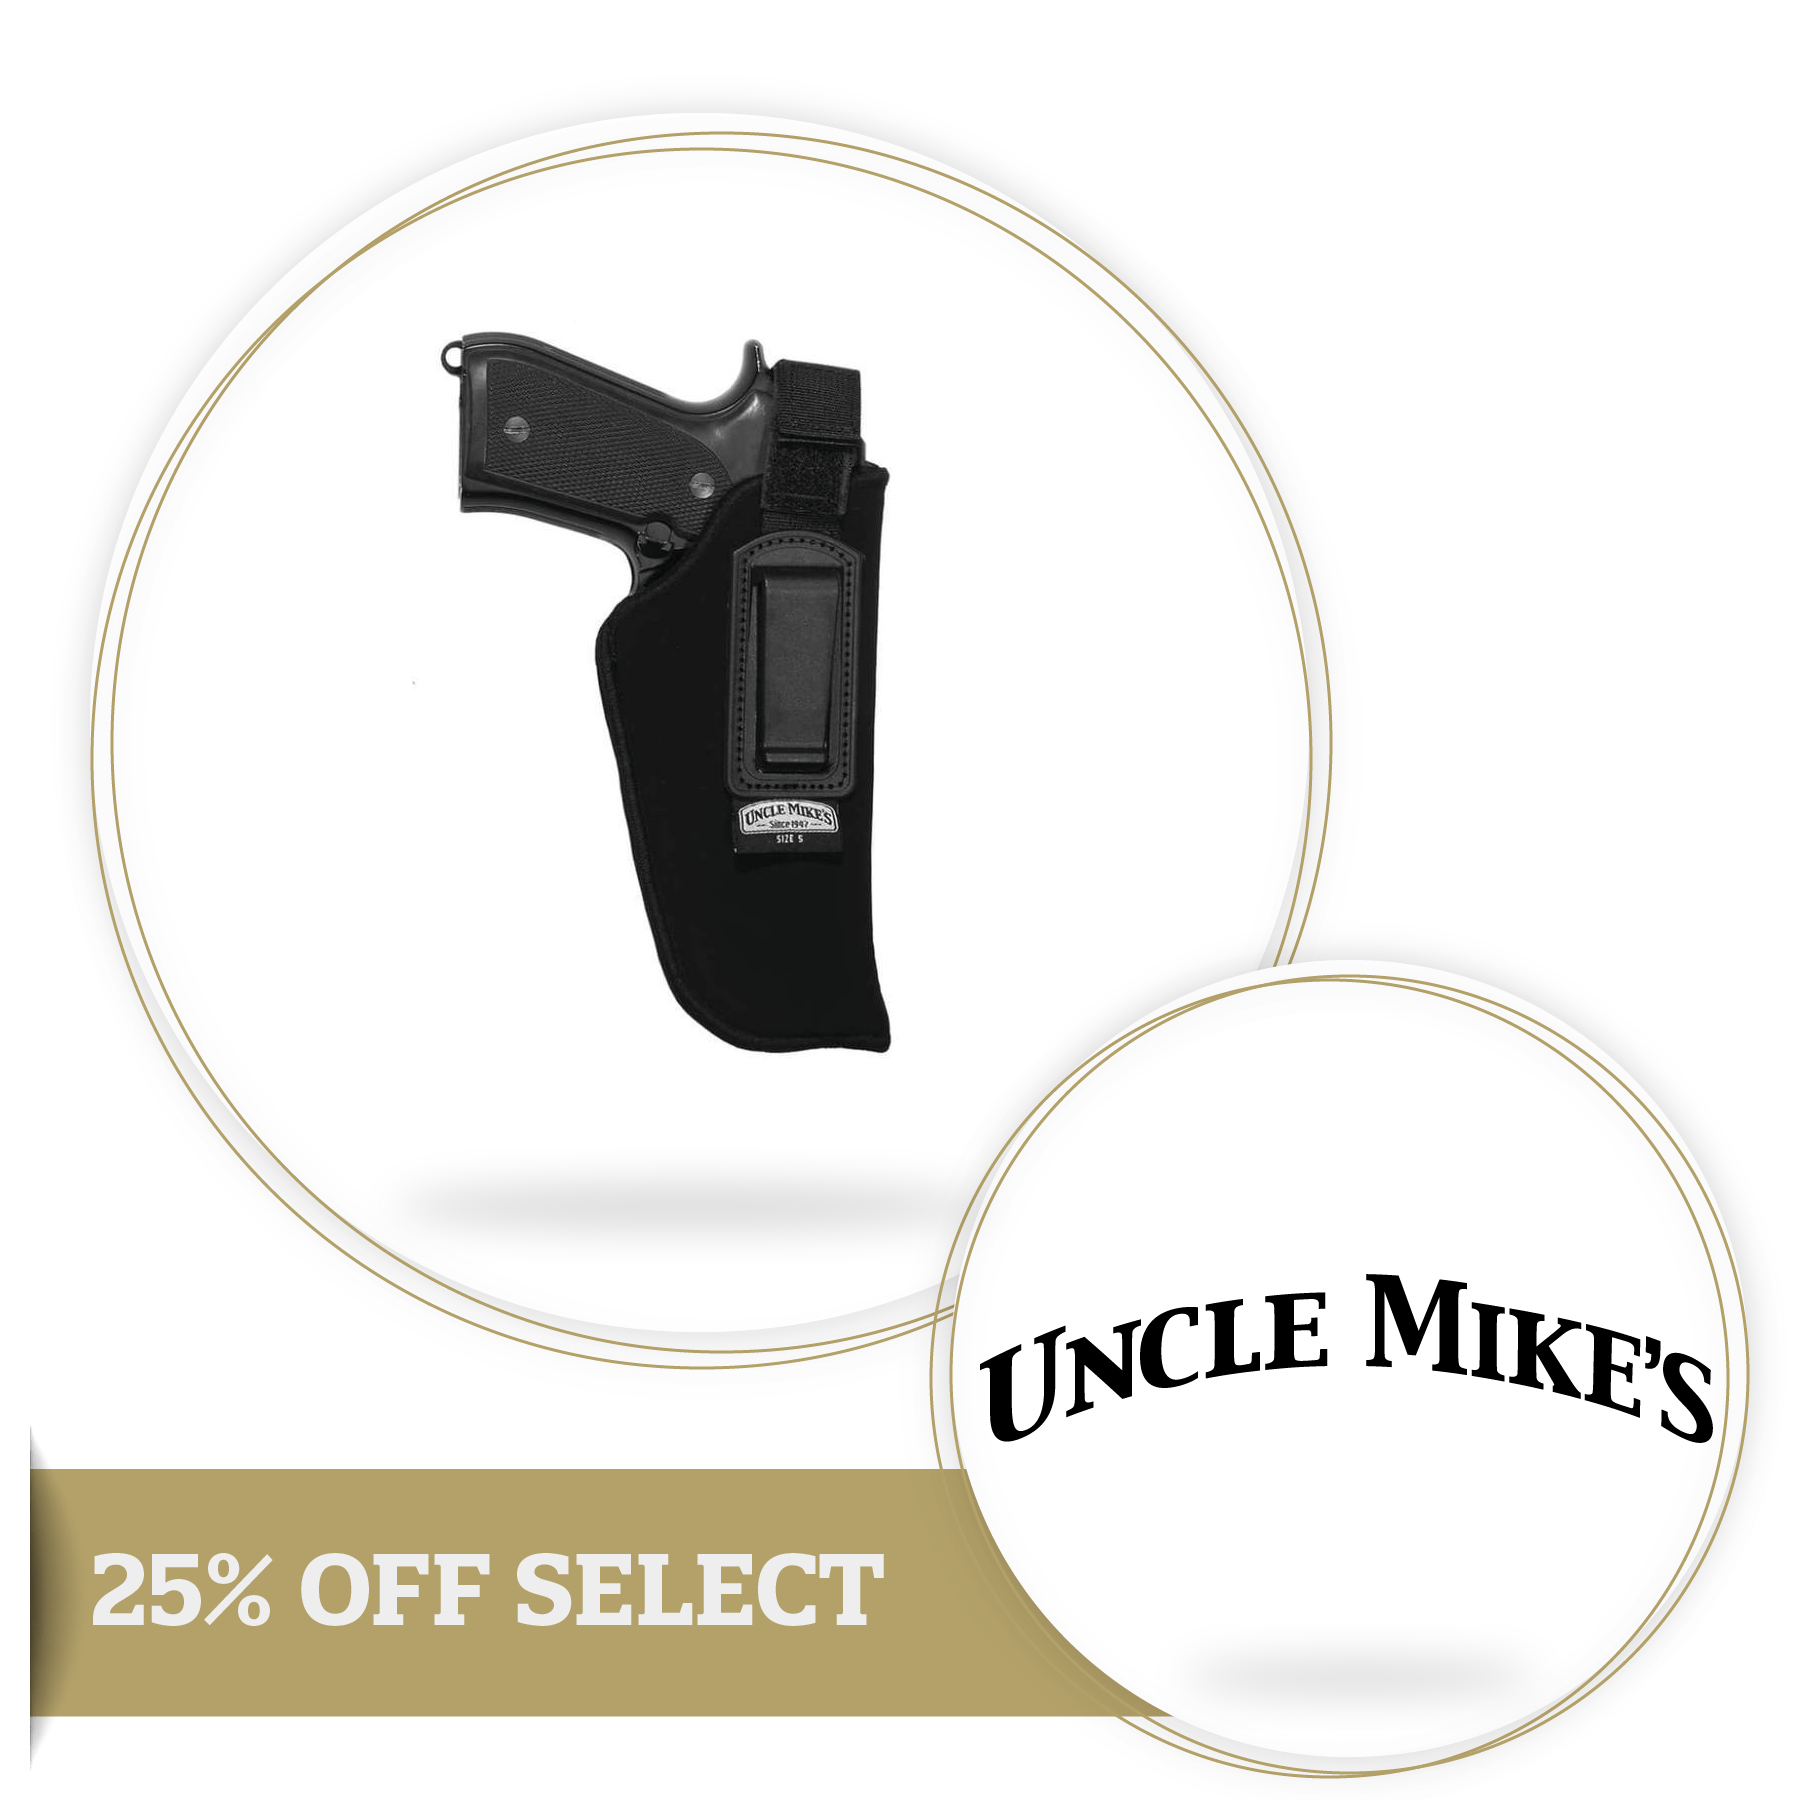 25% Off Uncle Mike's Sidekick Holsters